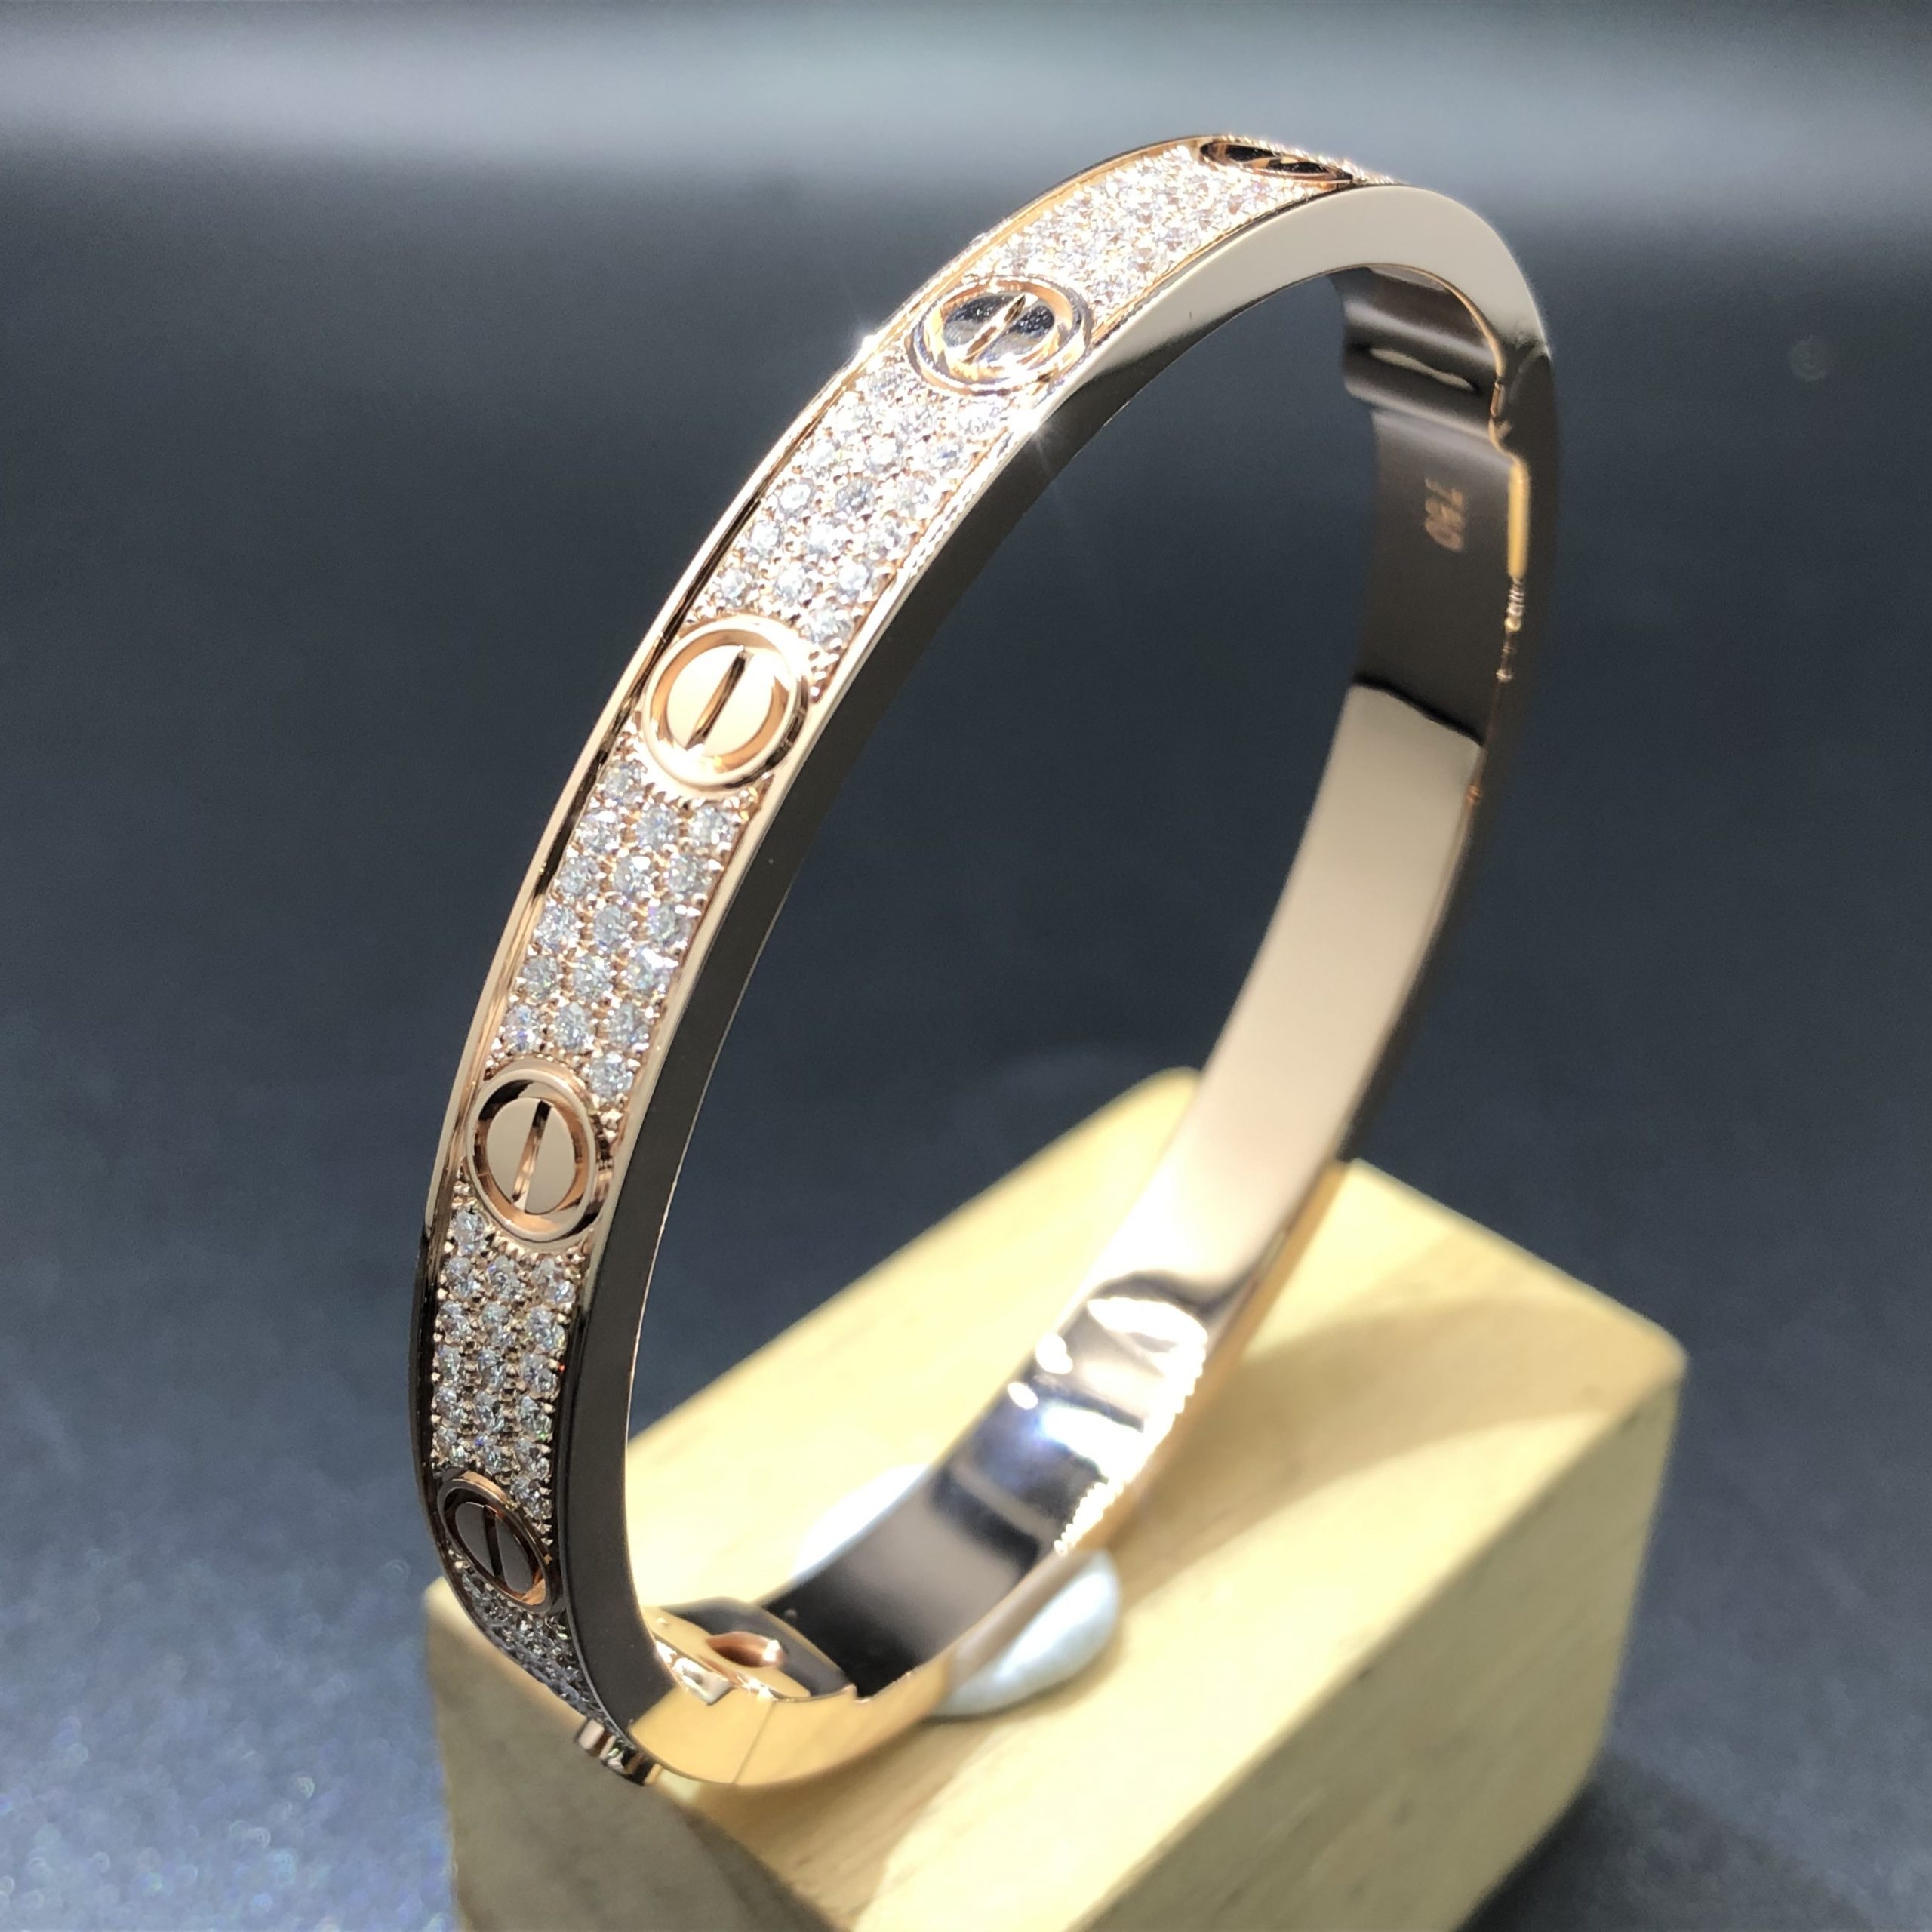 Cartier Love Bracelet Custom Made in Solid 18K Pink Gold with 204 Diamonds-paved